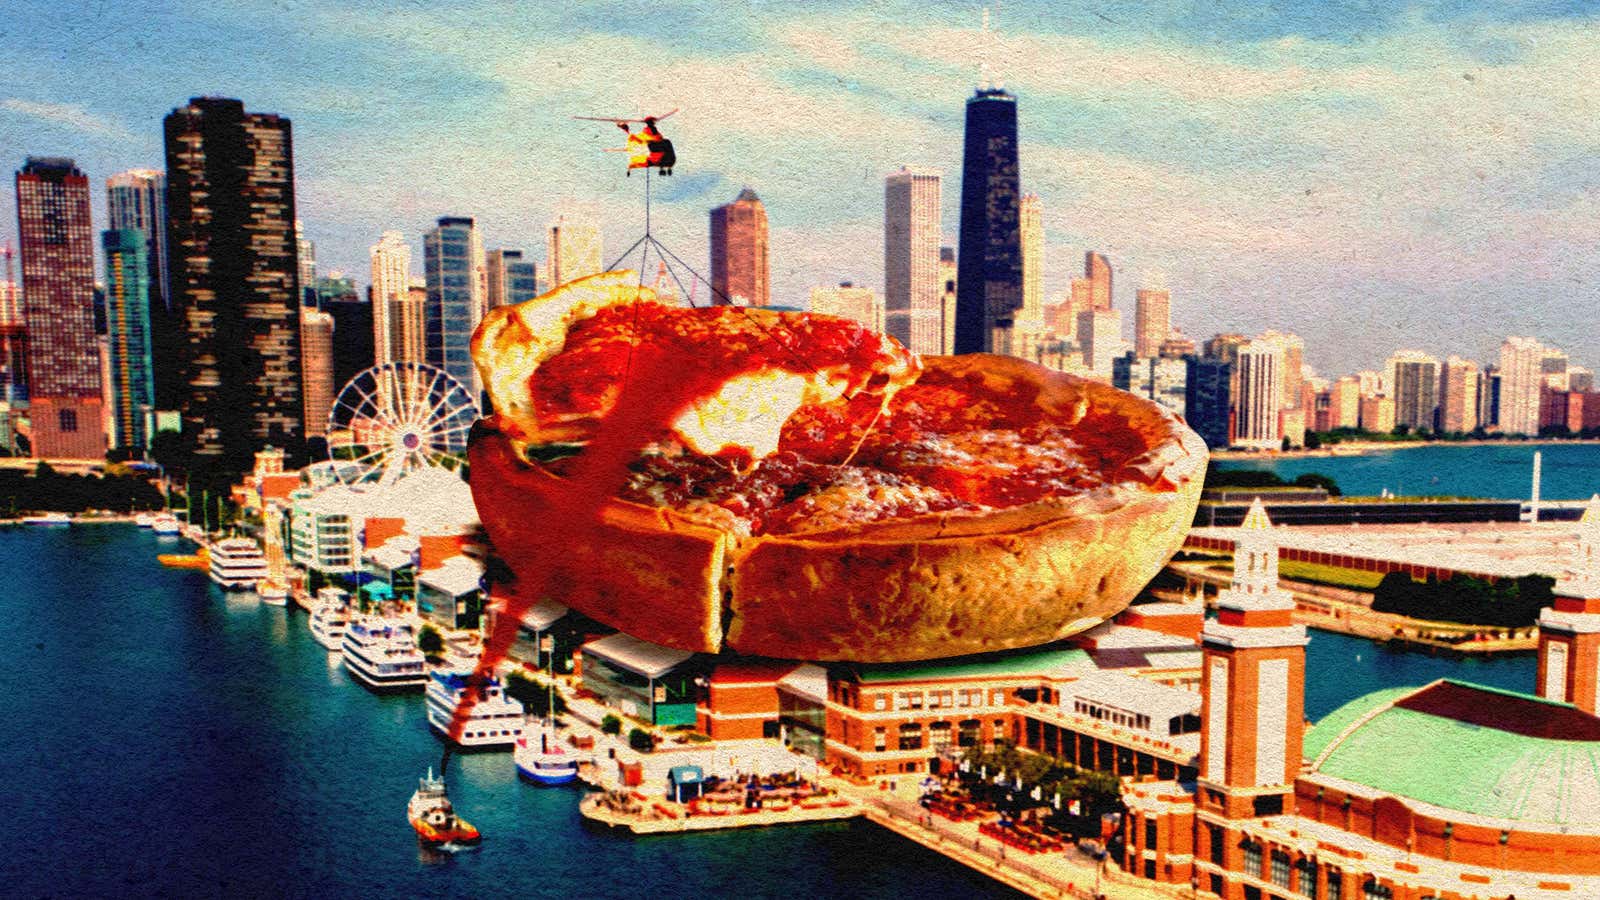 Stop Making the Same Tired Joke About Deep Dish Pizza